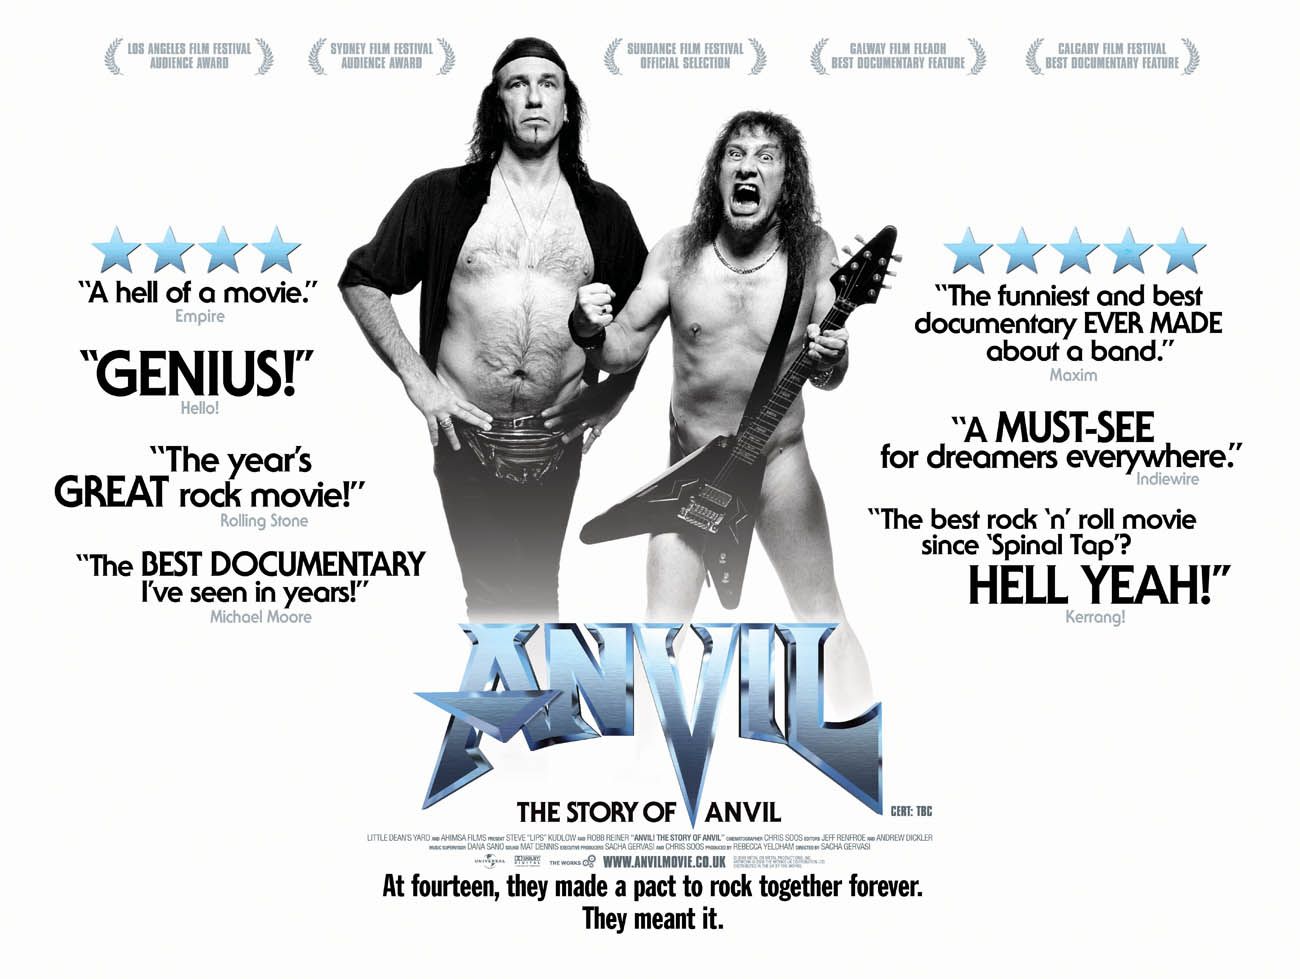 Anvil! The Story of Anvil movies in Australia